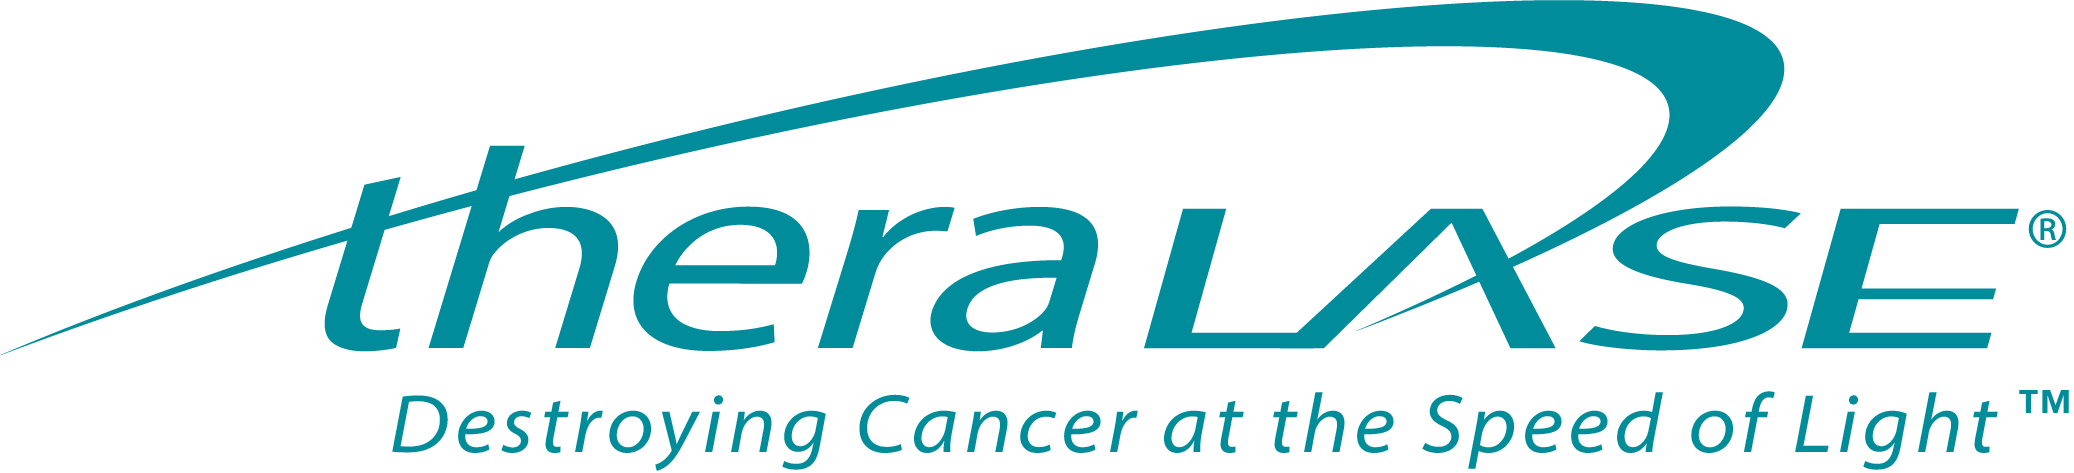 theralase_logo_destroying_cancer.png